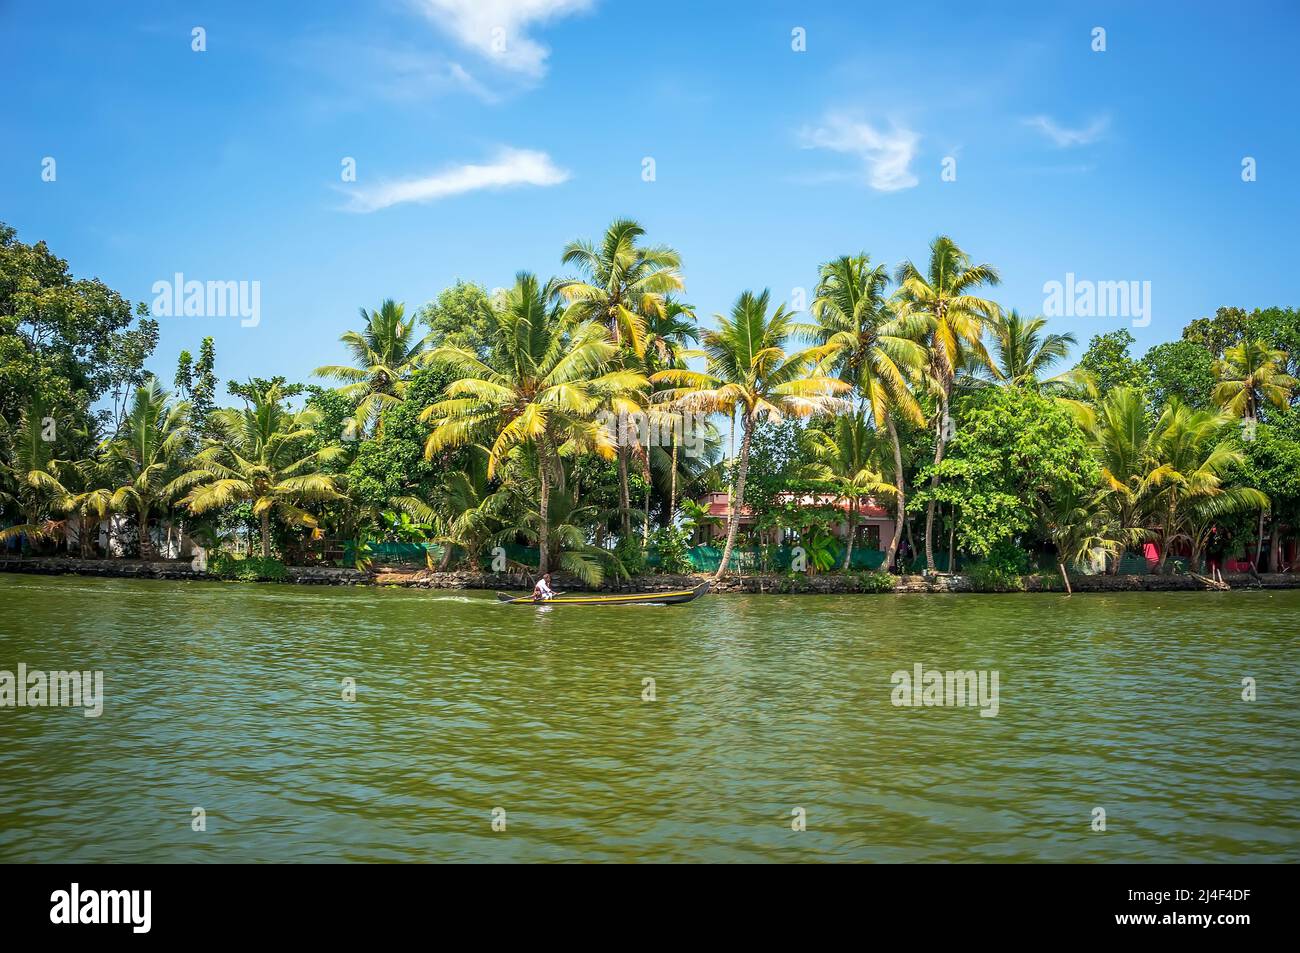 panoramic view with Coconut trees and fisherman house, backwaters landscape of Alleppey, Kerala, India Stock Photo